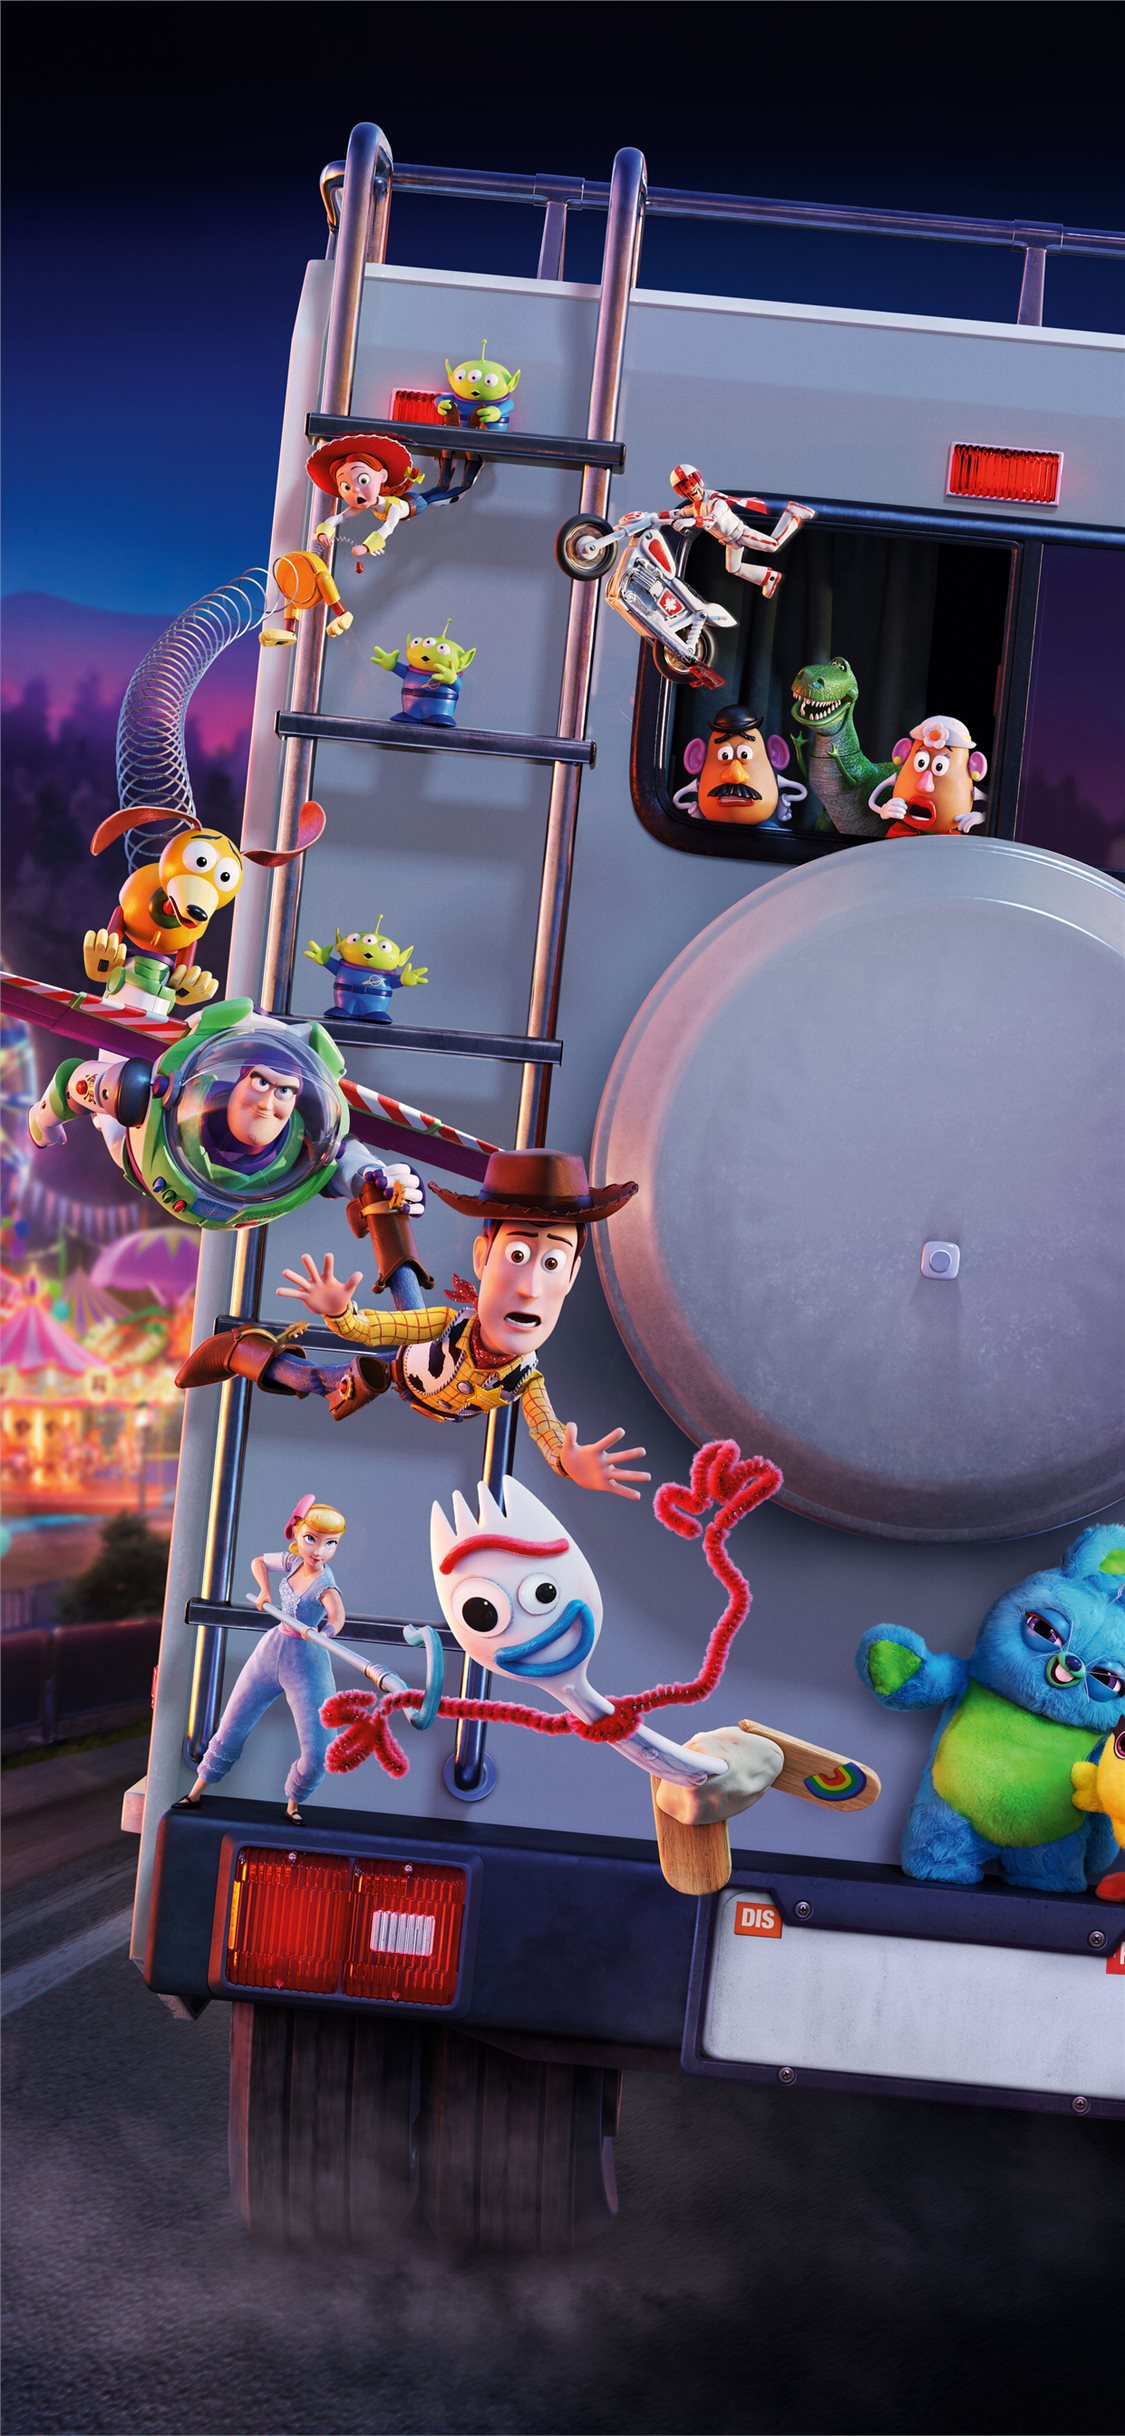 download the new for windows Toy Story 4